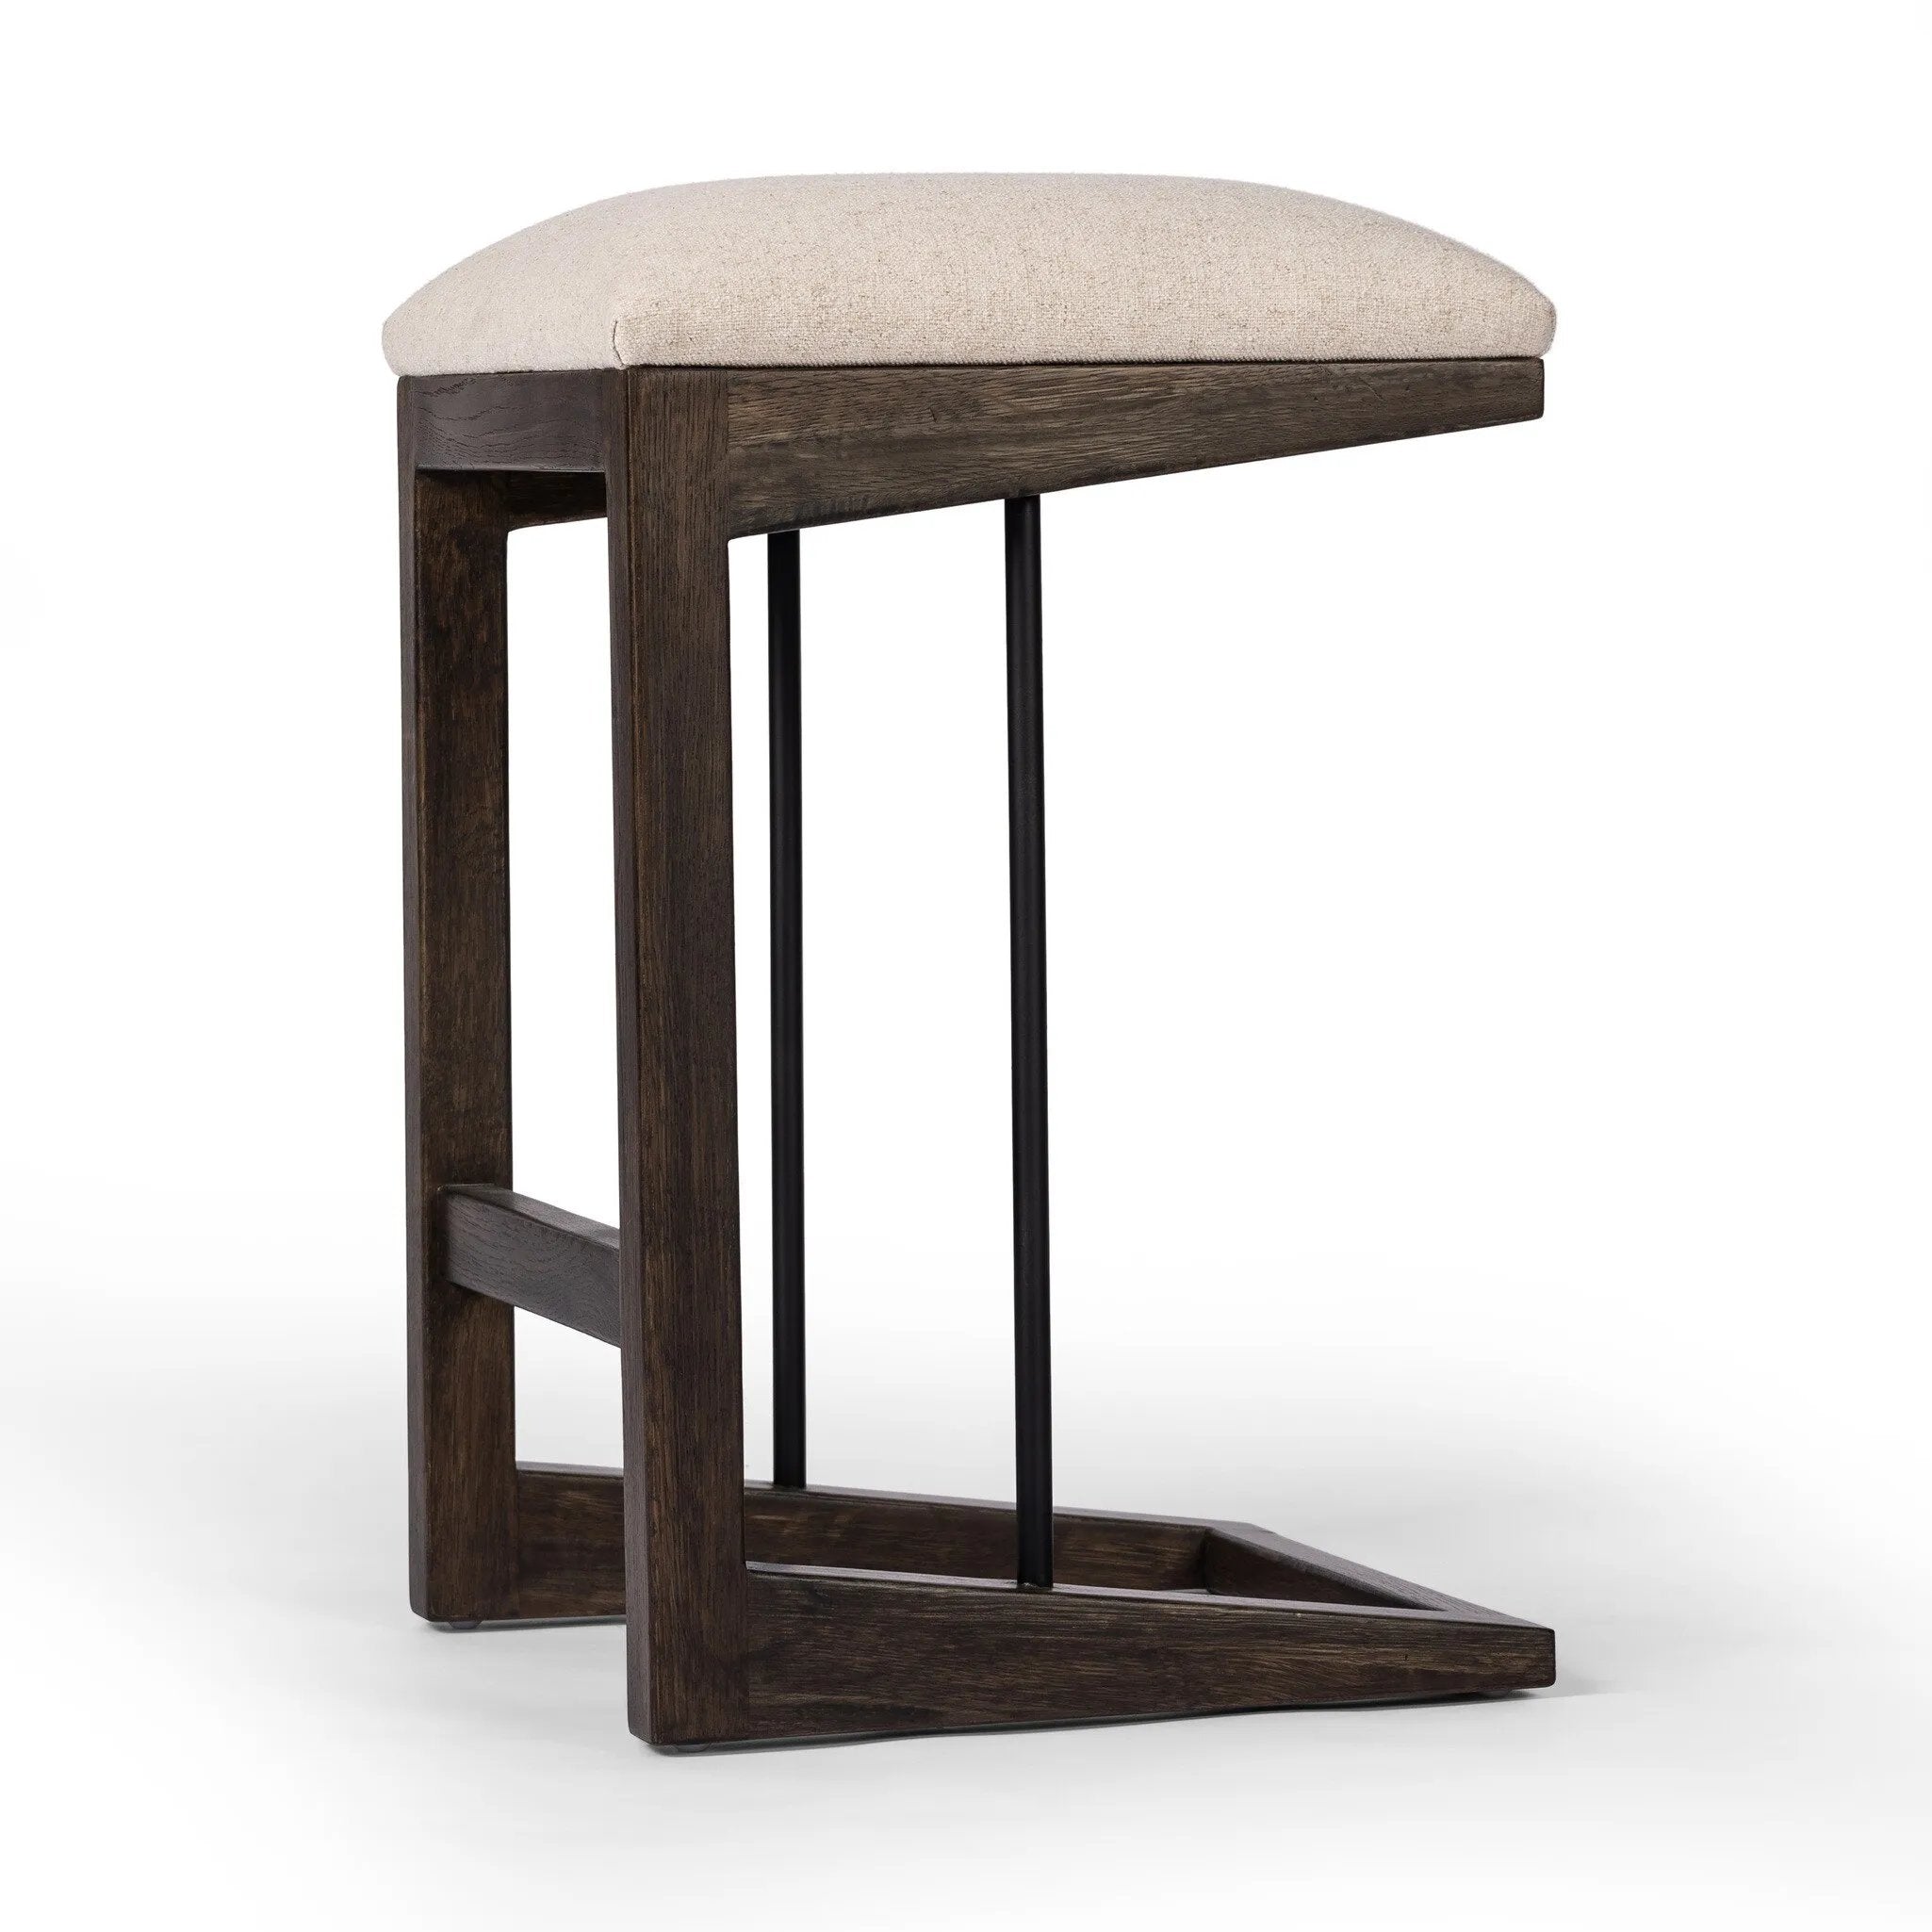 A stunner from every angle, this architecturally inspired stool features an angular base crafted from solid oak with two iron rods for added support and visual interest. Seat is upholstered in a linen/cotton/poly blend performance fabric with subtle texture throughout. Amethyst Home provides interior design, new home construction design consulting, vintage area rugs, and lighting in the Portland metro area.